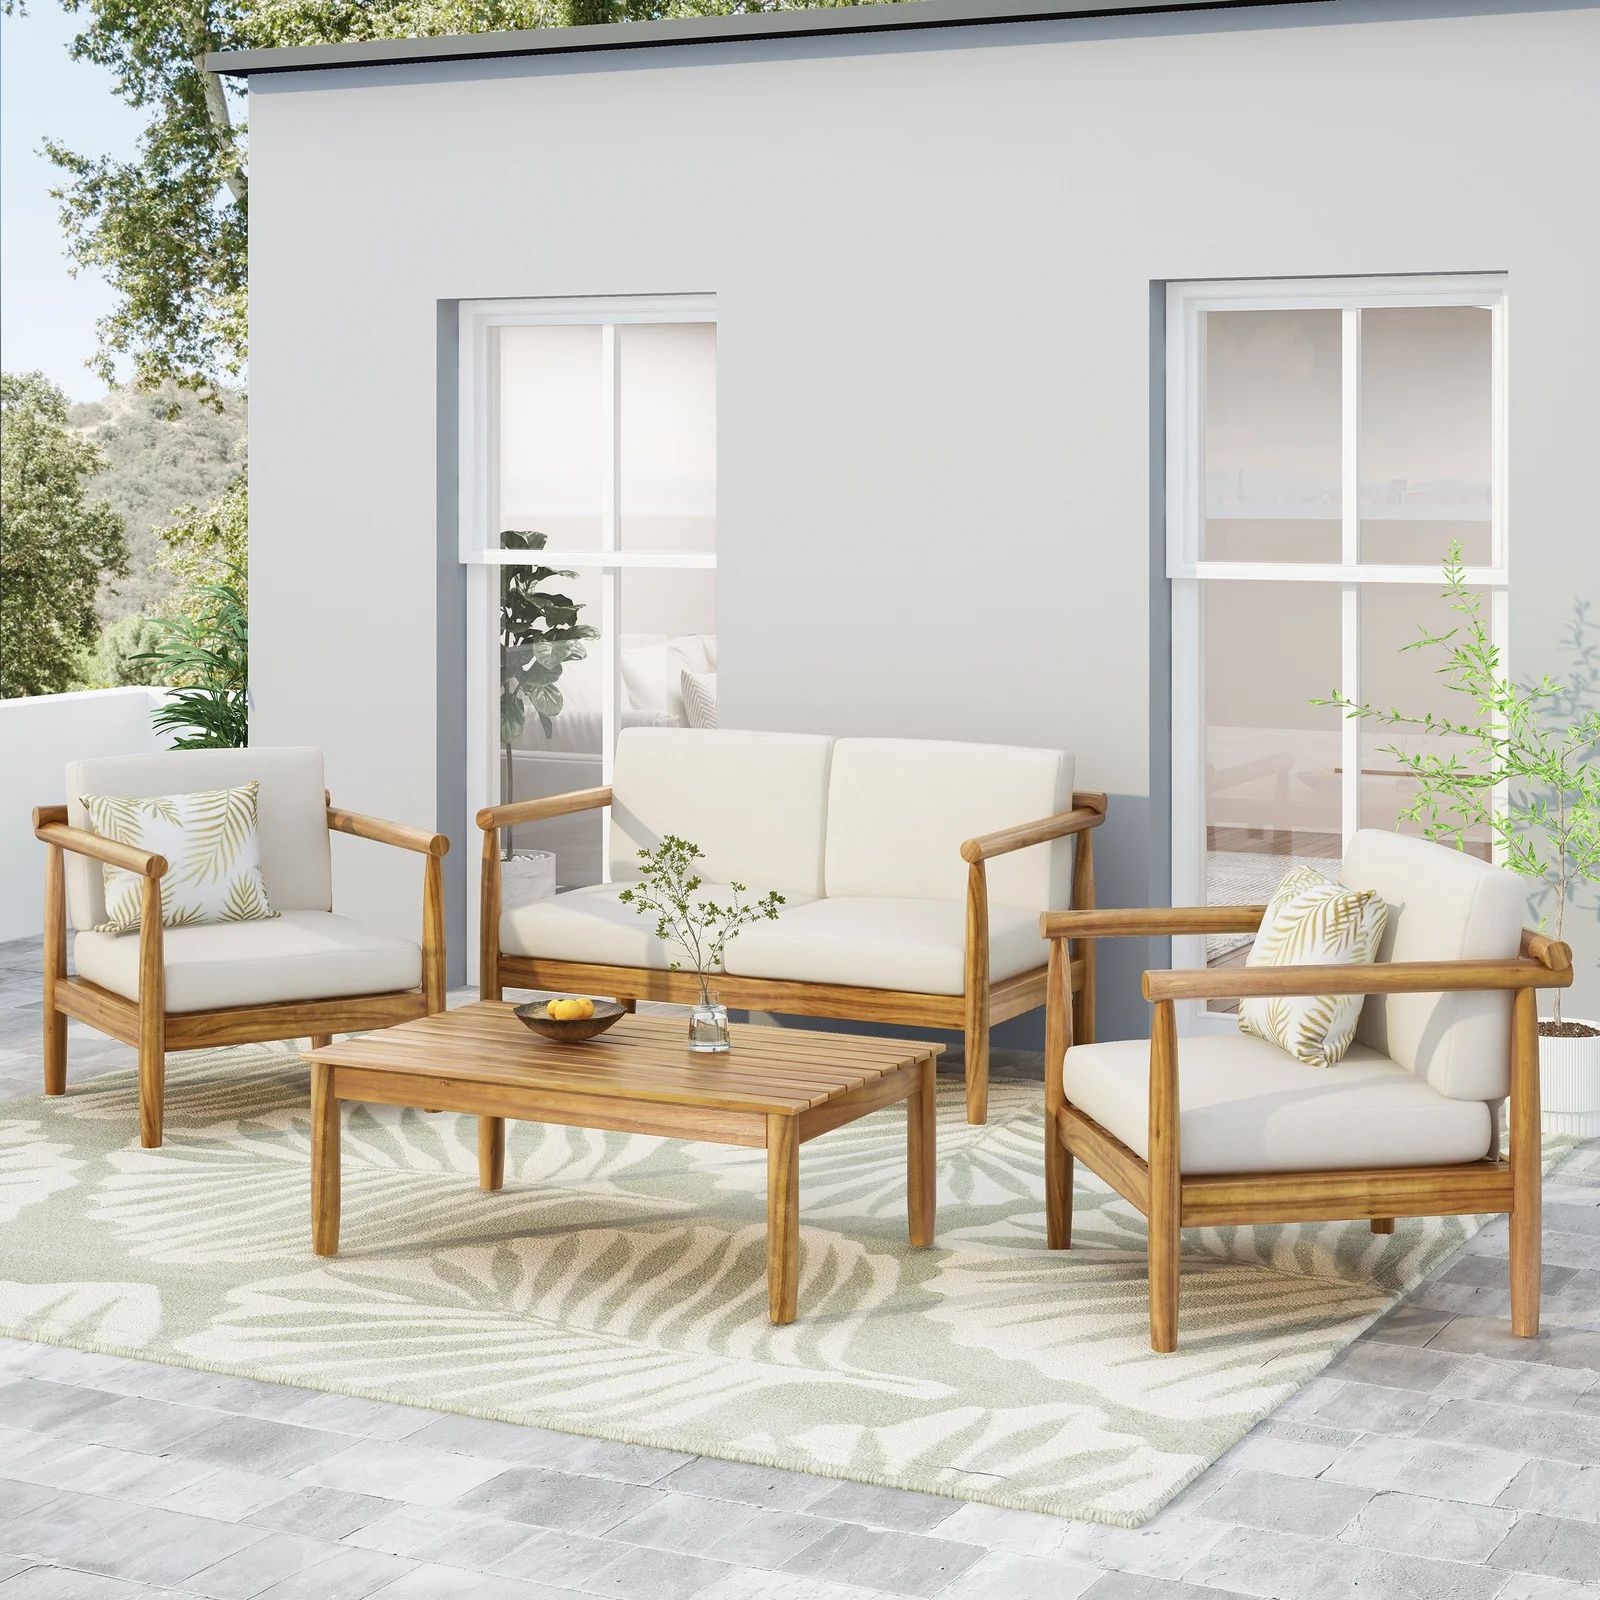 Outdoor 4 Piece Sofa Seating Group with Cushions | Wayfair North America